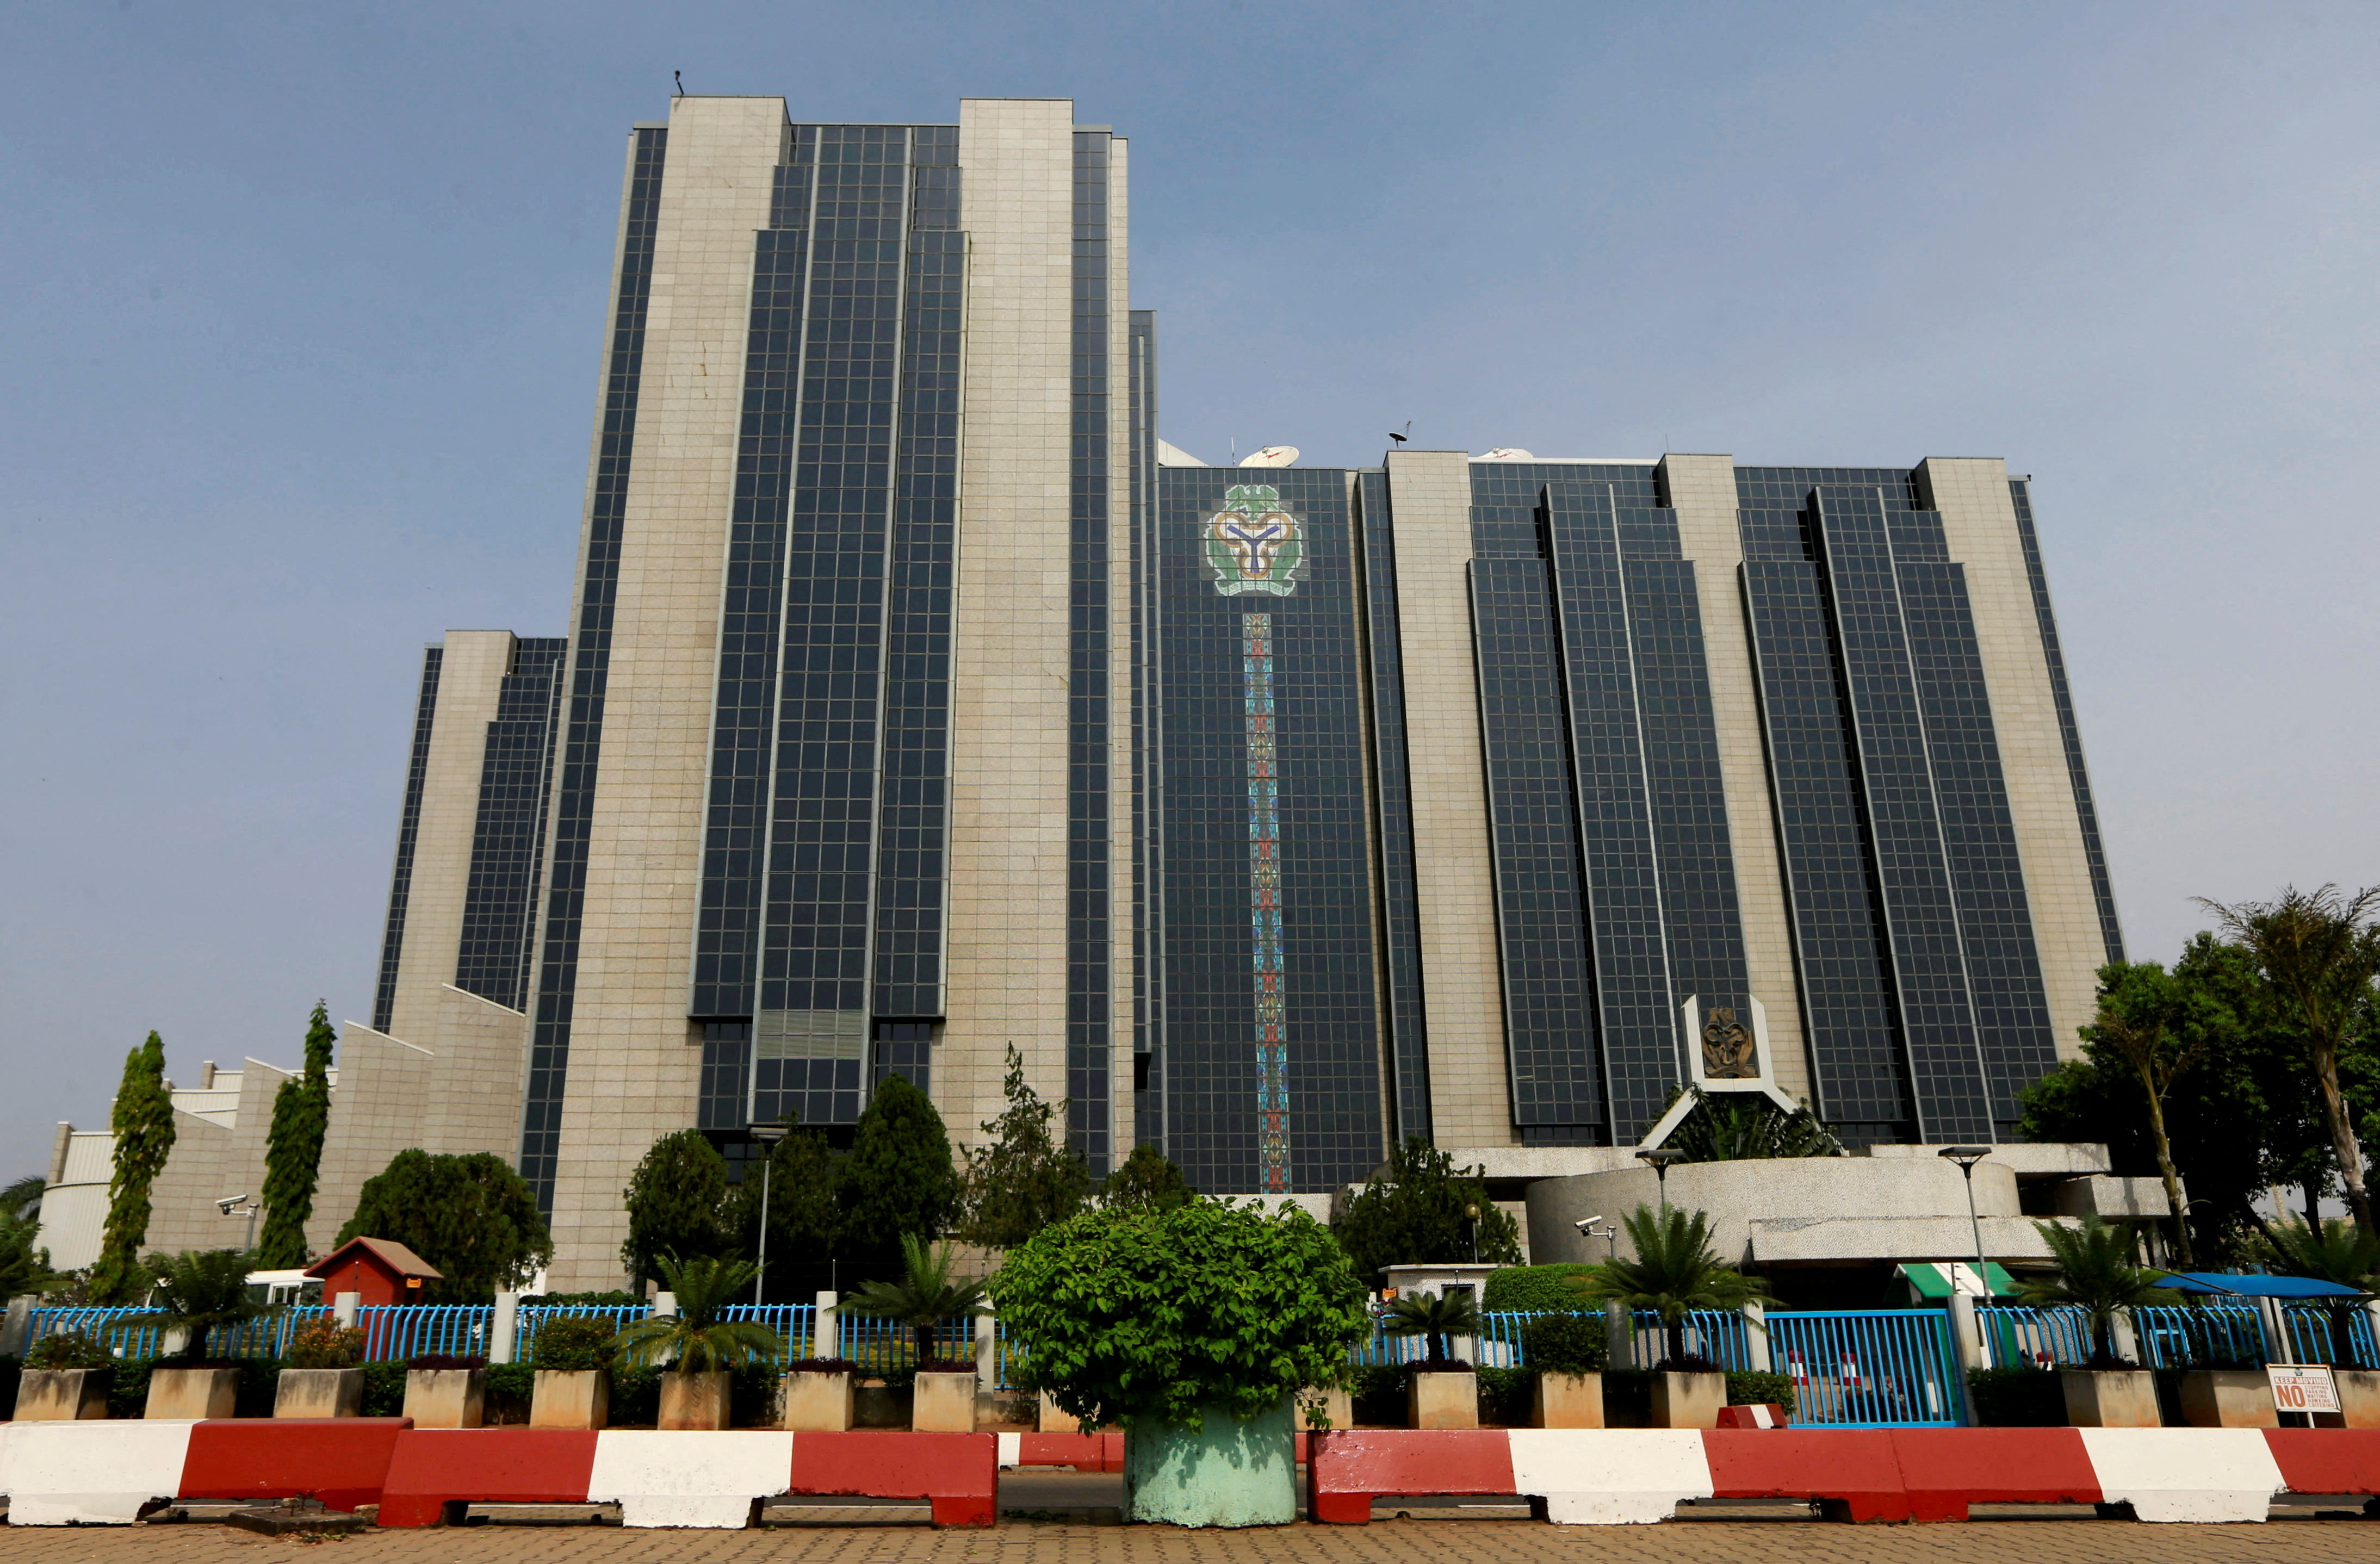 A view shows the headquarters of the Central Bank of Nigeria in Abuja